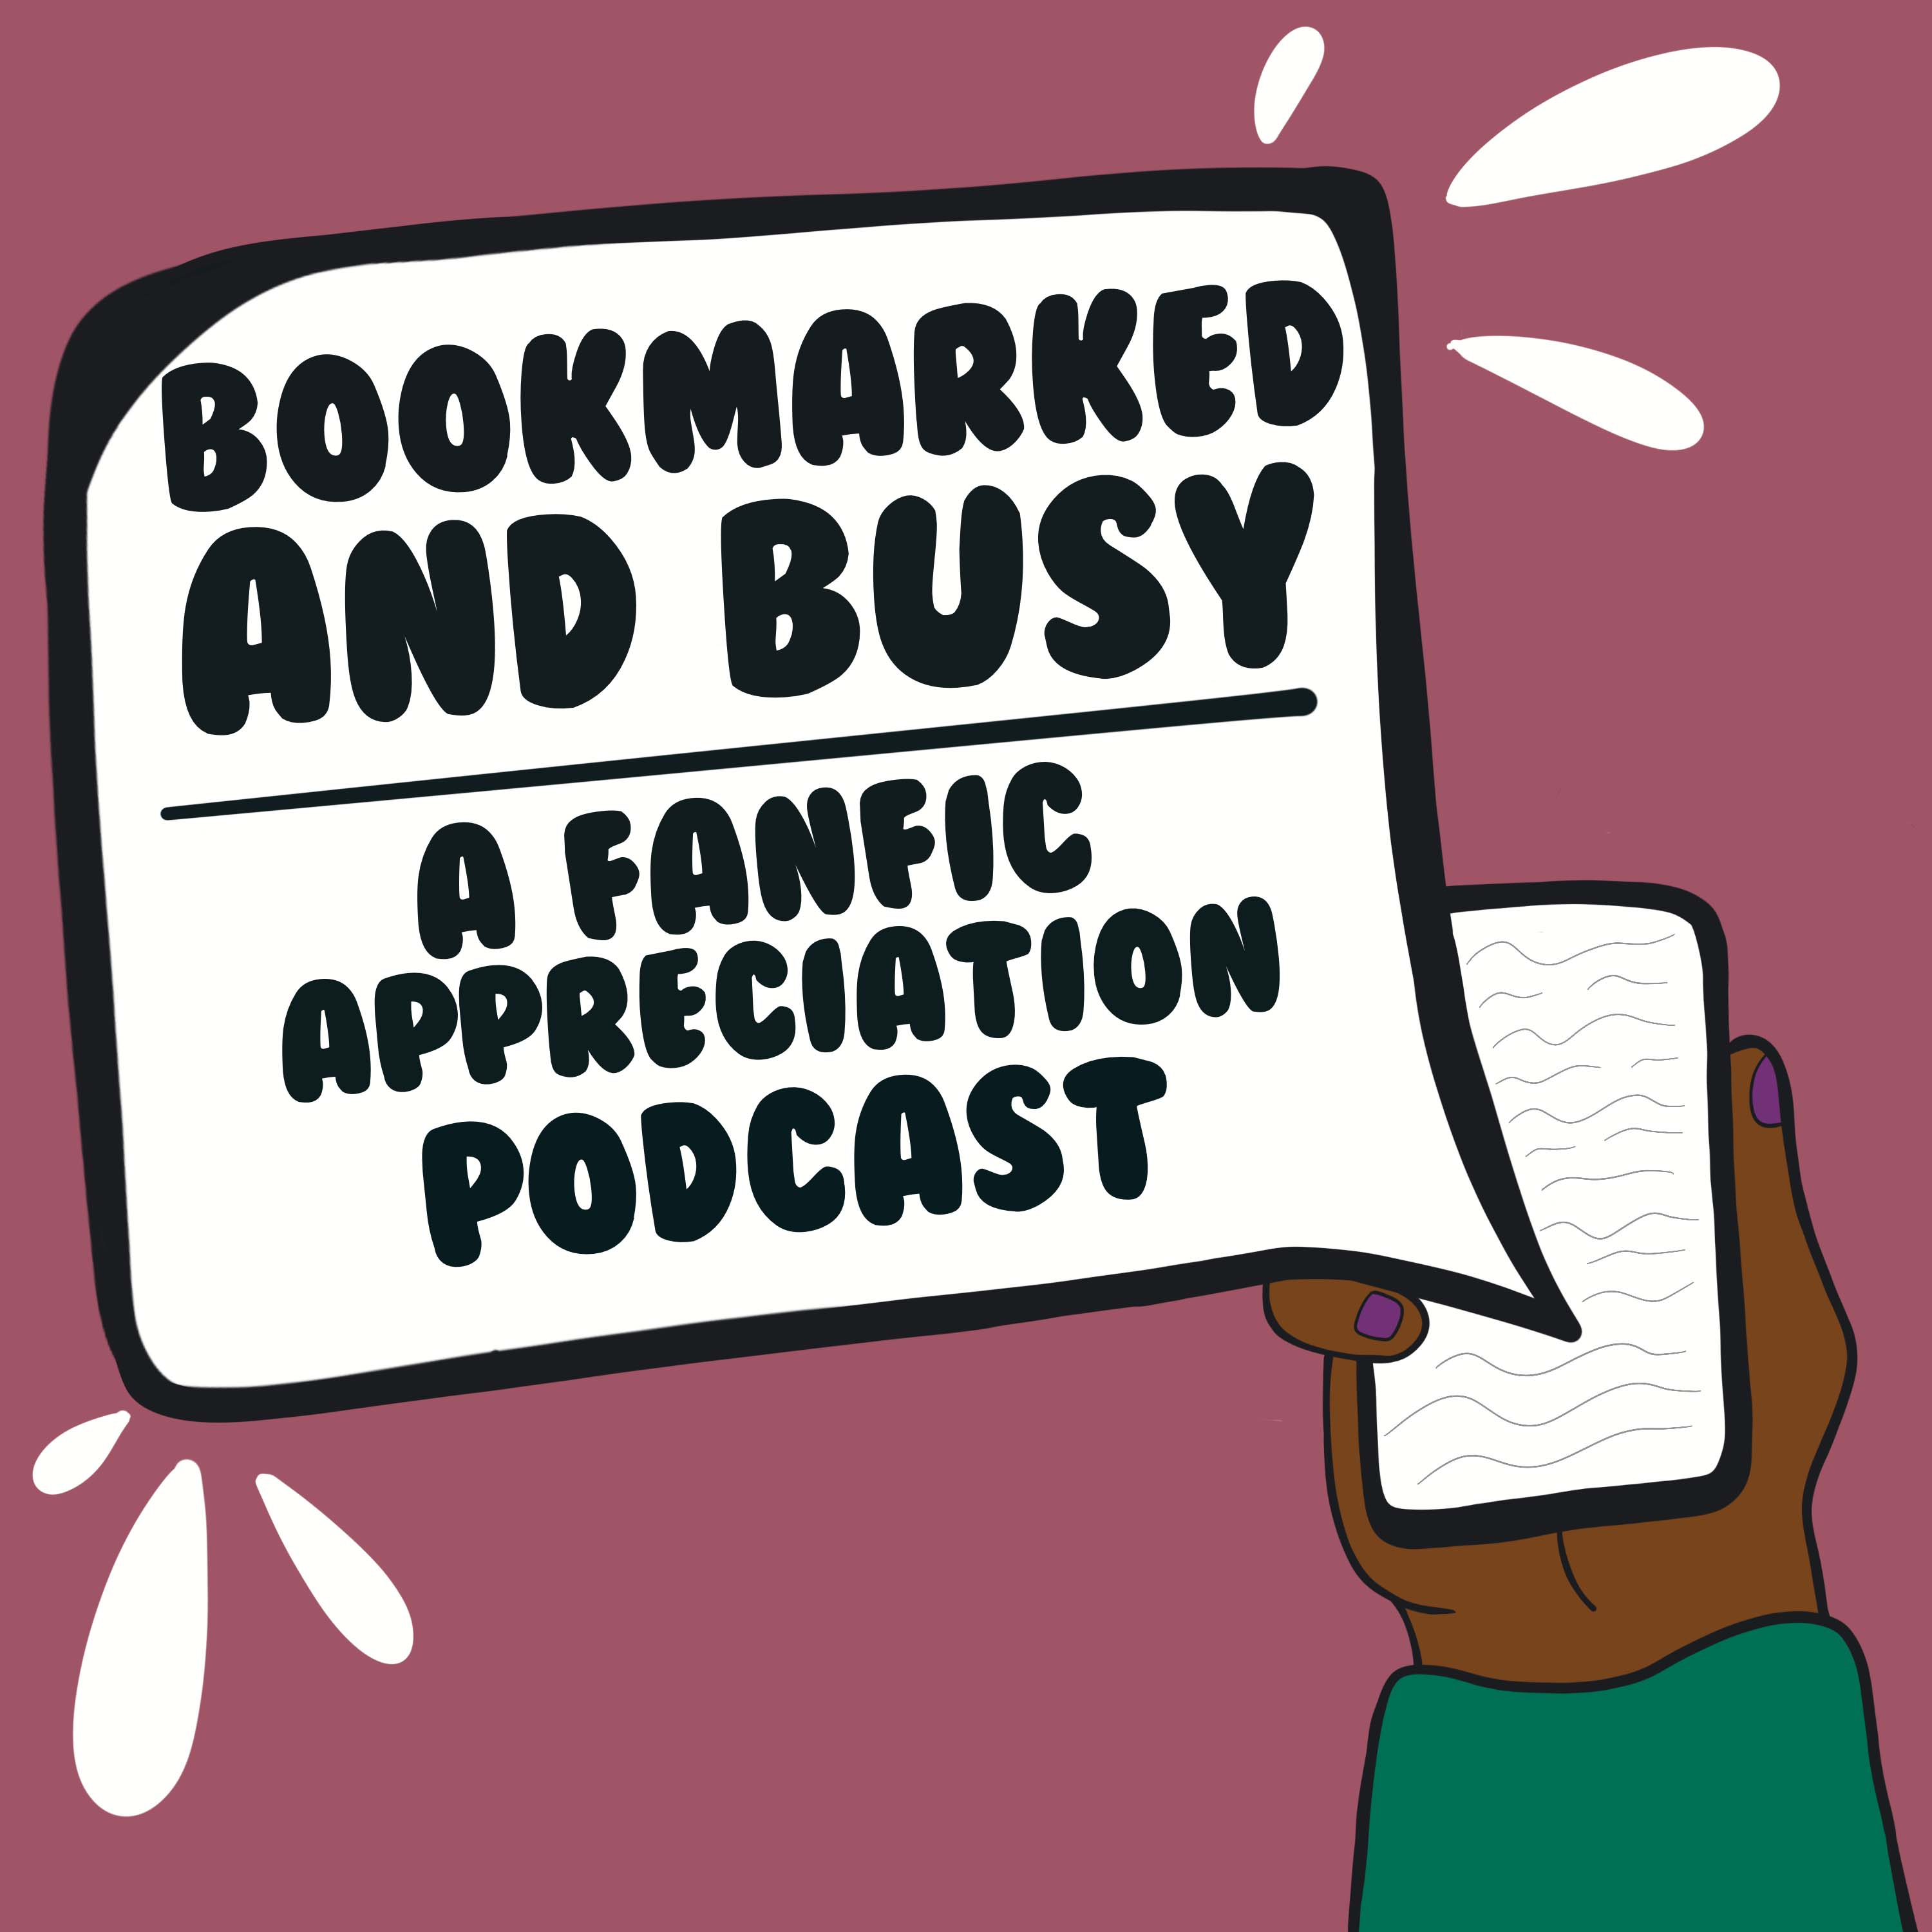 Artwork for Bookmarked and Busy: A Fanfic Appreciation Podcast